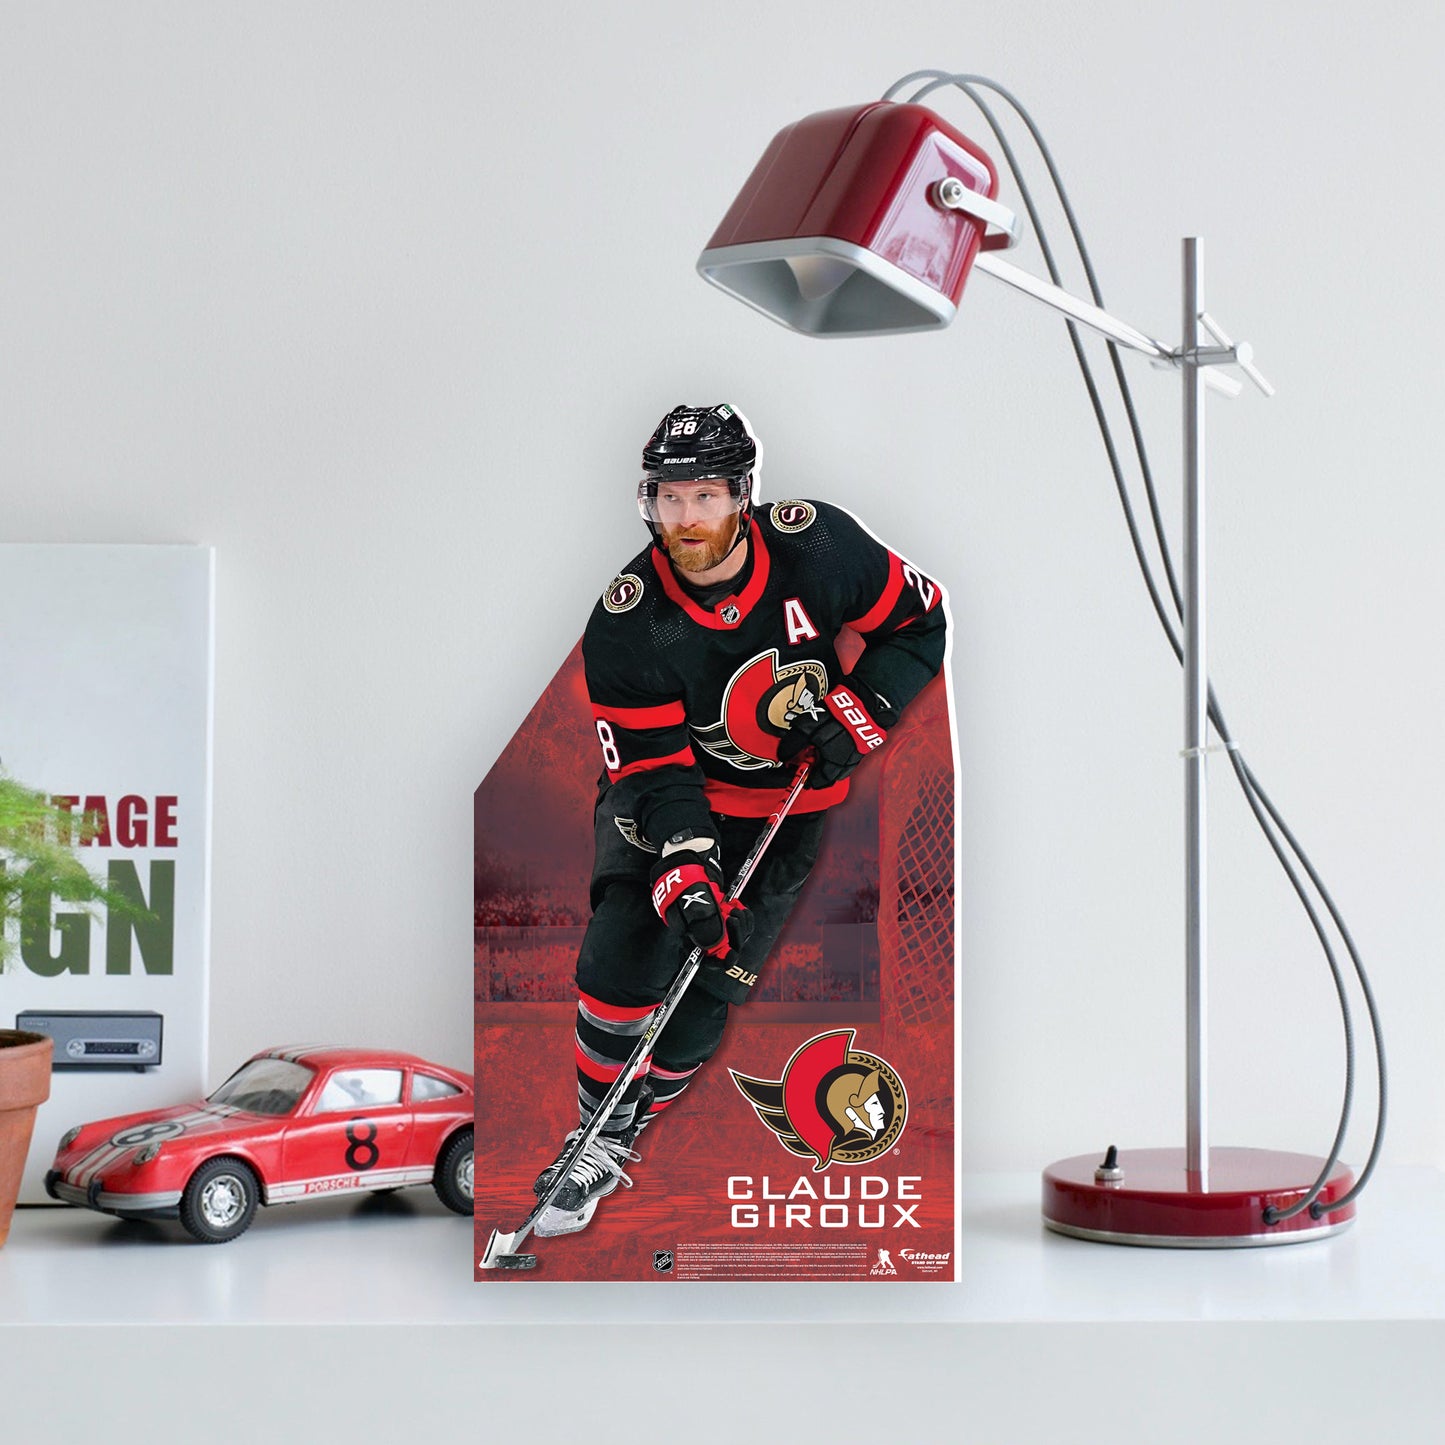 Ottawa Senators: Claude Giroux Mini Cardstock Cutout - Officially Licensed NHL Stand Out